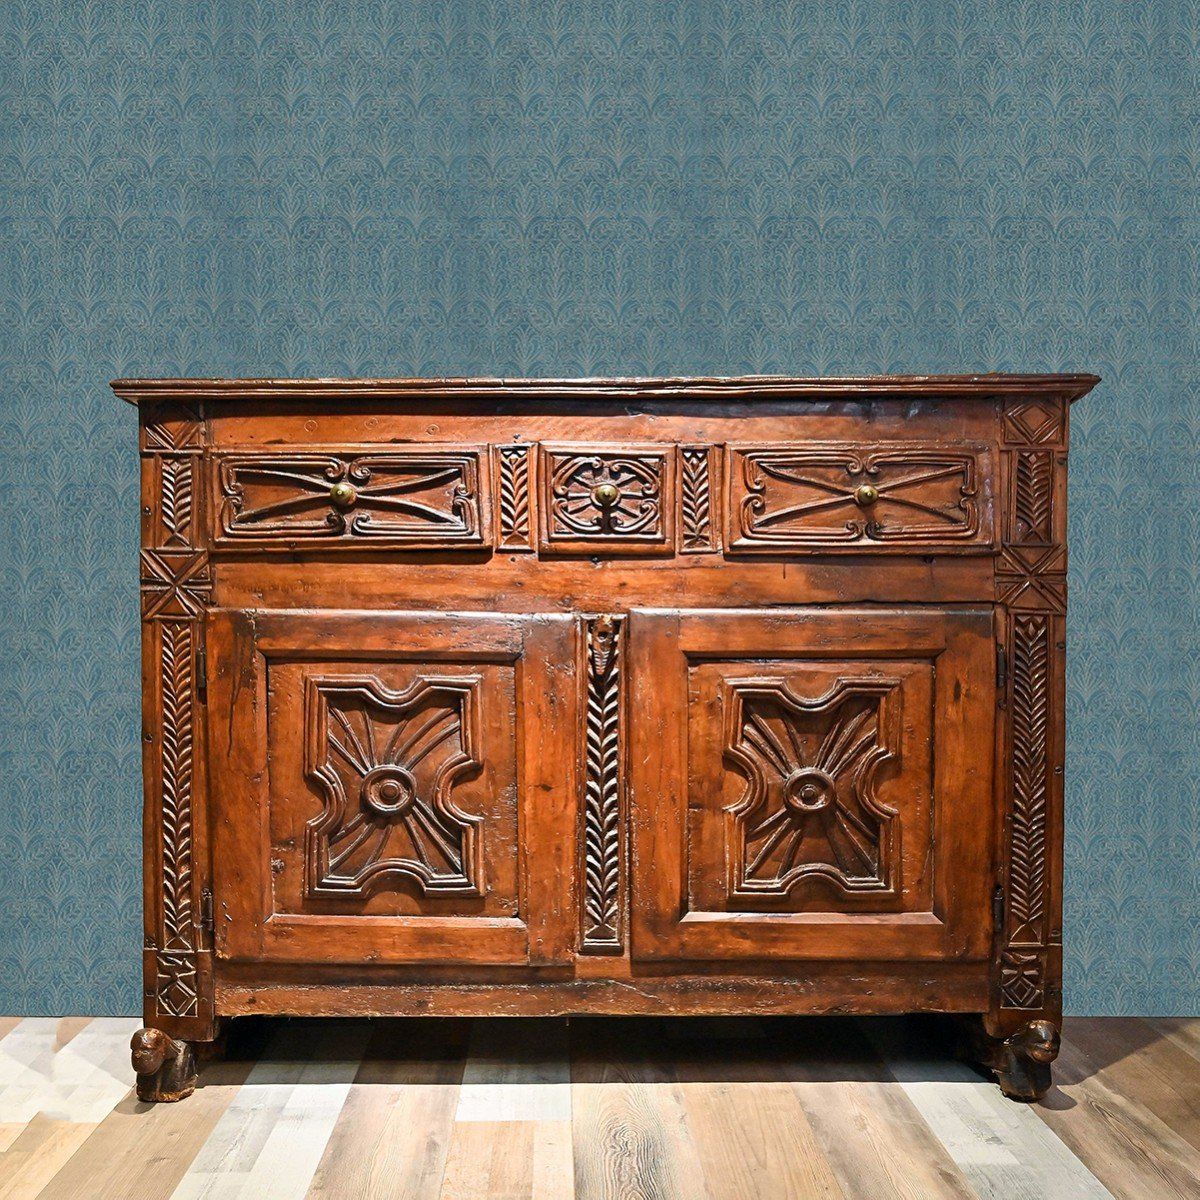 Proantic: Antique Walnut Sideboard, 16th / 17th Century Regarding Current Antique Storage Sideboards With Doors (View 10 of 15)